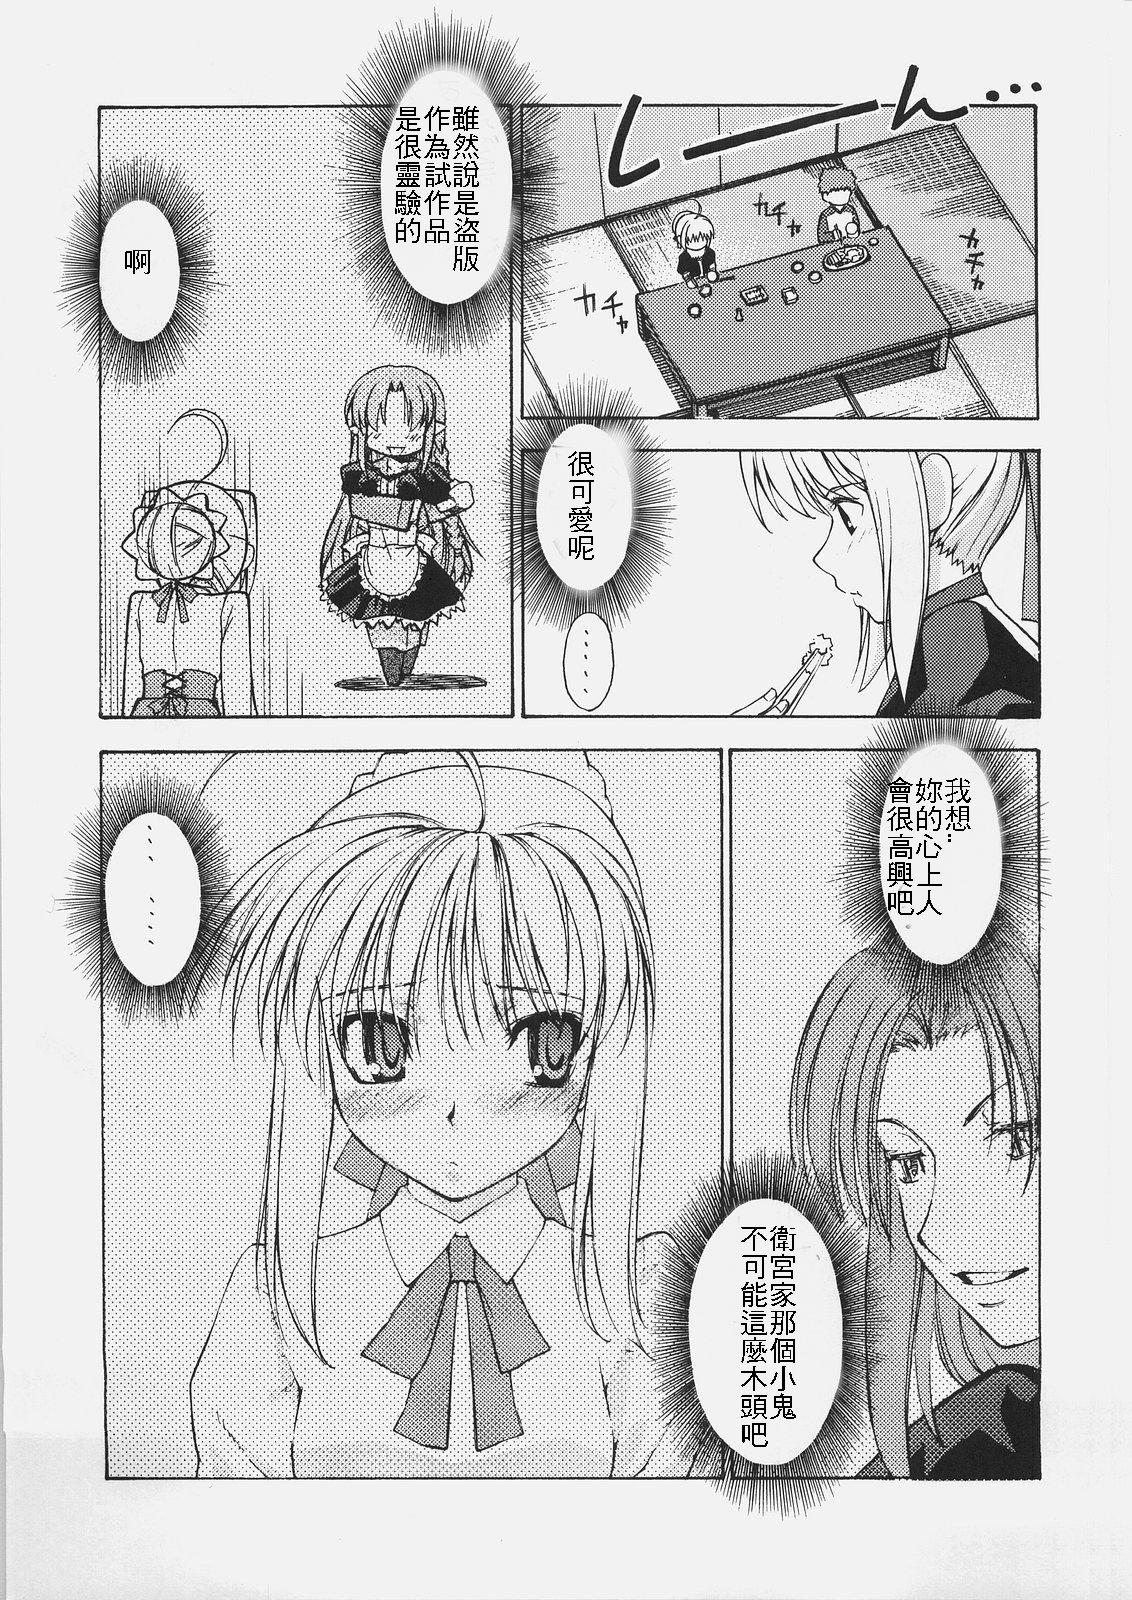 Weird HUNGRY LOVER - Fate stay night Twistys - Page 9